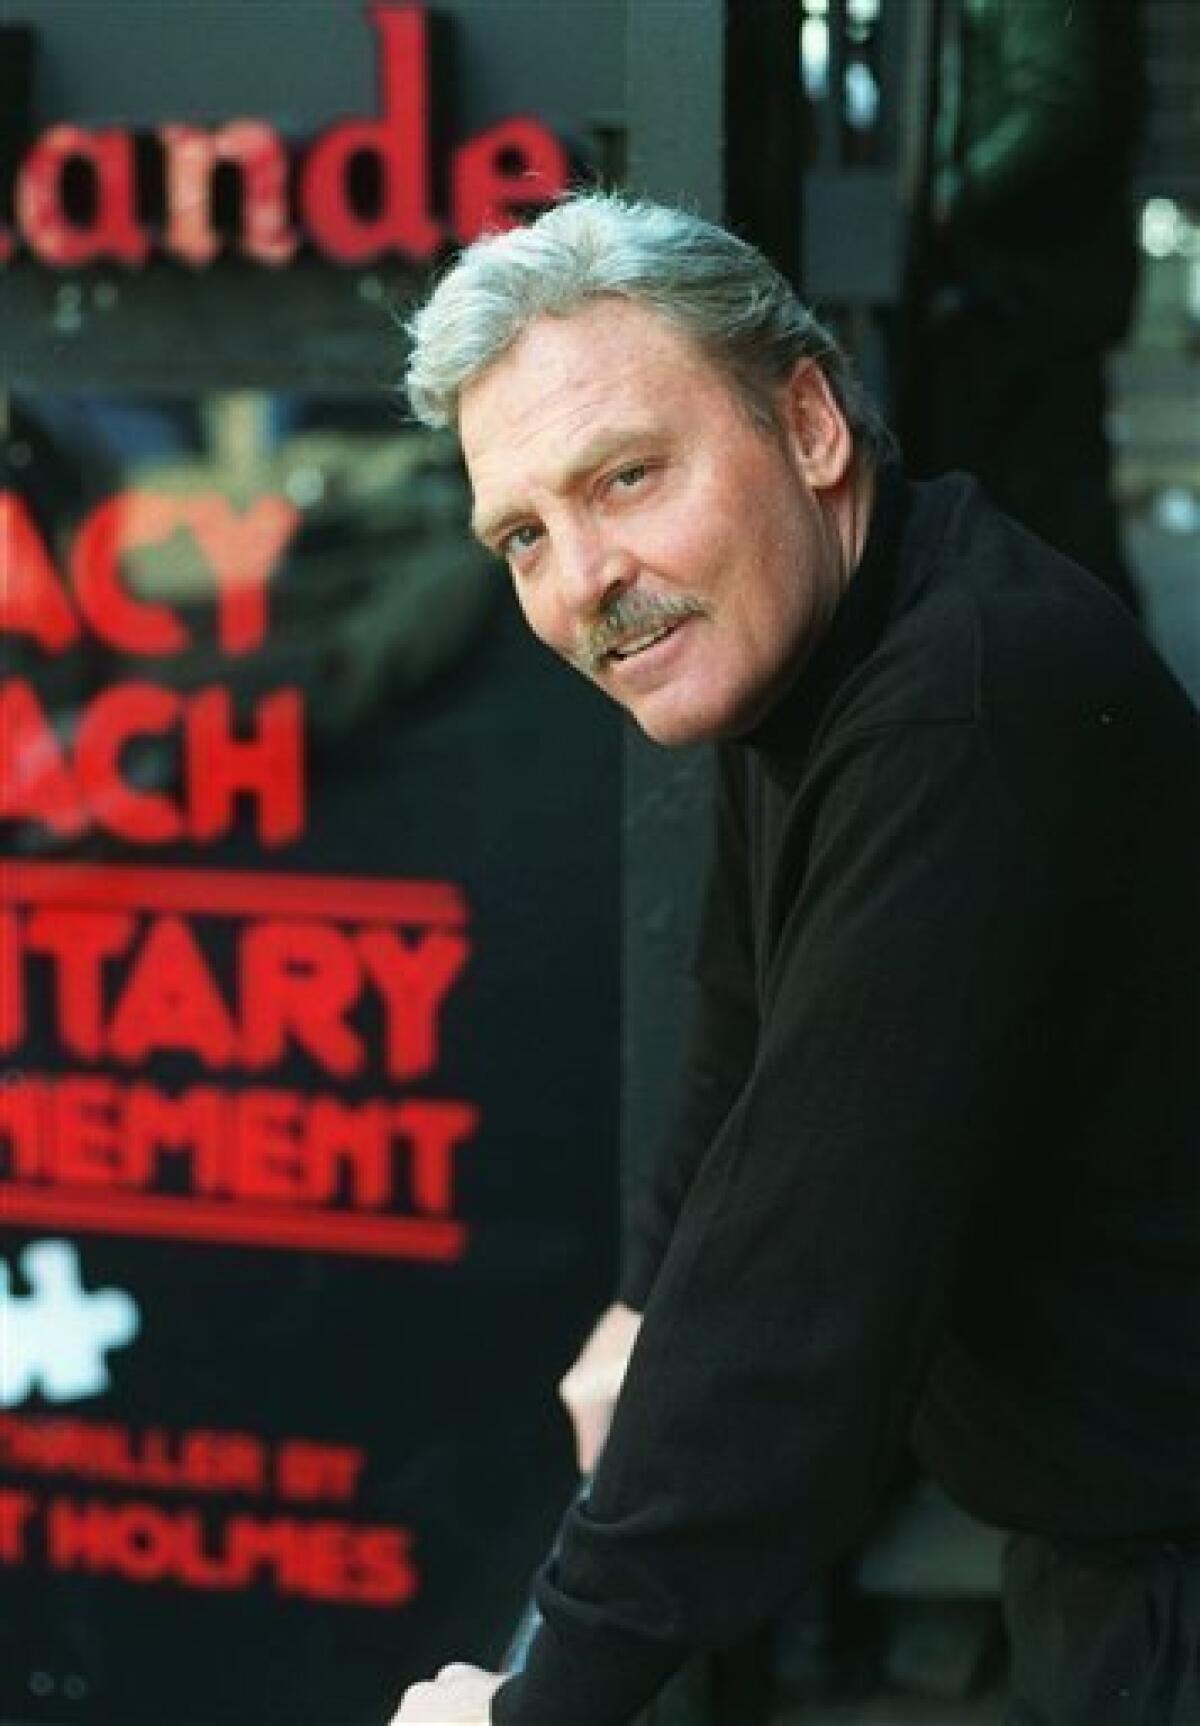 FILE--Actor Stacy Keach, shown in this Oct. 22, 1992 file picture. Keach has been hospitalized Tuesday March 17, 2009 and was replaced by his understudy in his role as the former president in a Los Angeles stage production of "Frost/Nixon." Dick Guttman, a spokesman for the 67-year-old actor, says Keach was in stable condition. He didn't say why Keach was hospitalized or provide further details. (AP Photo/Wyatt Counts, File)